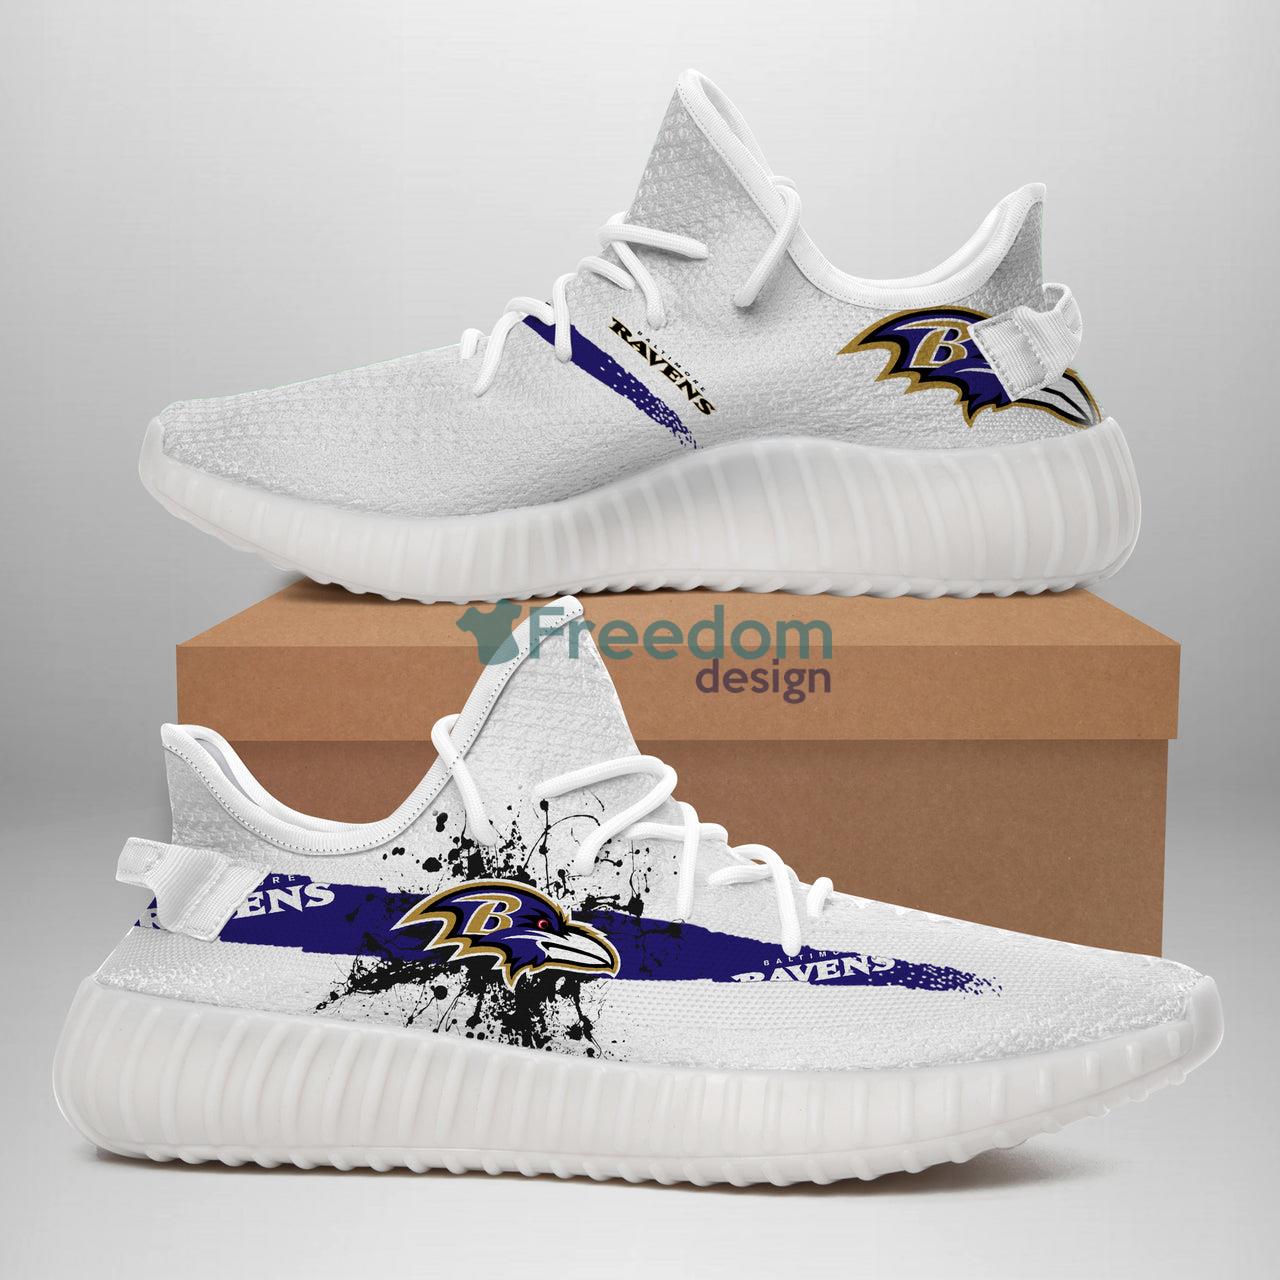 Baltimore Ravens Team Sport Lover Yeezy Shoes Product Photo 1